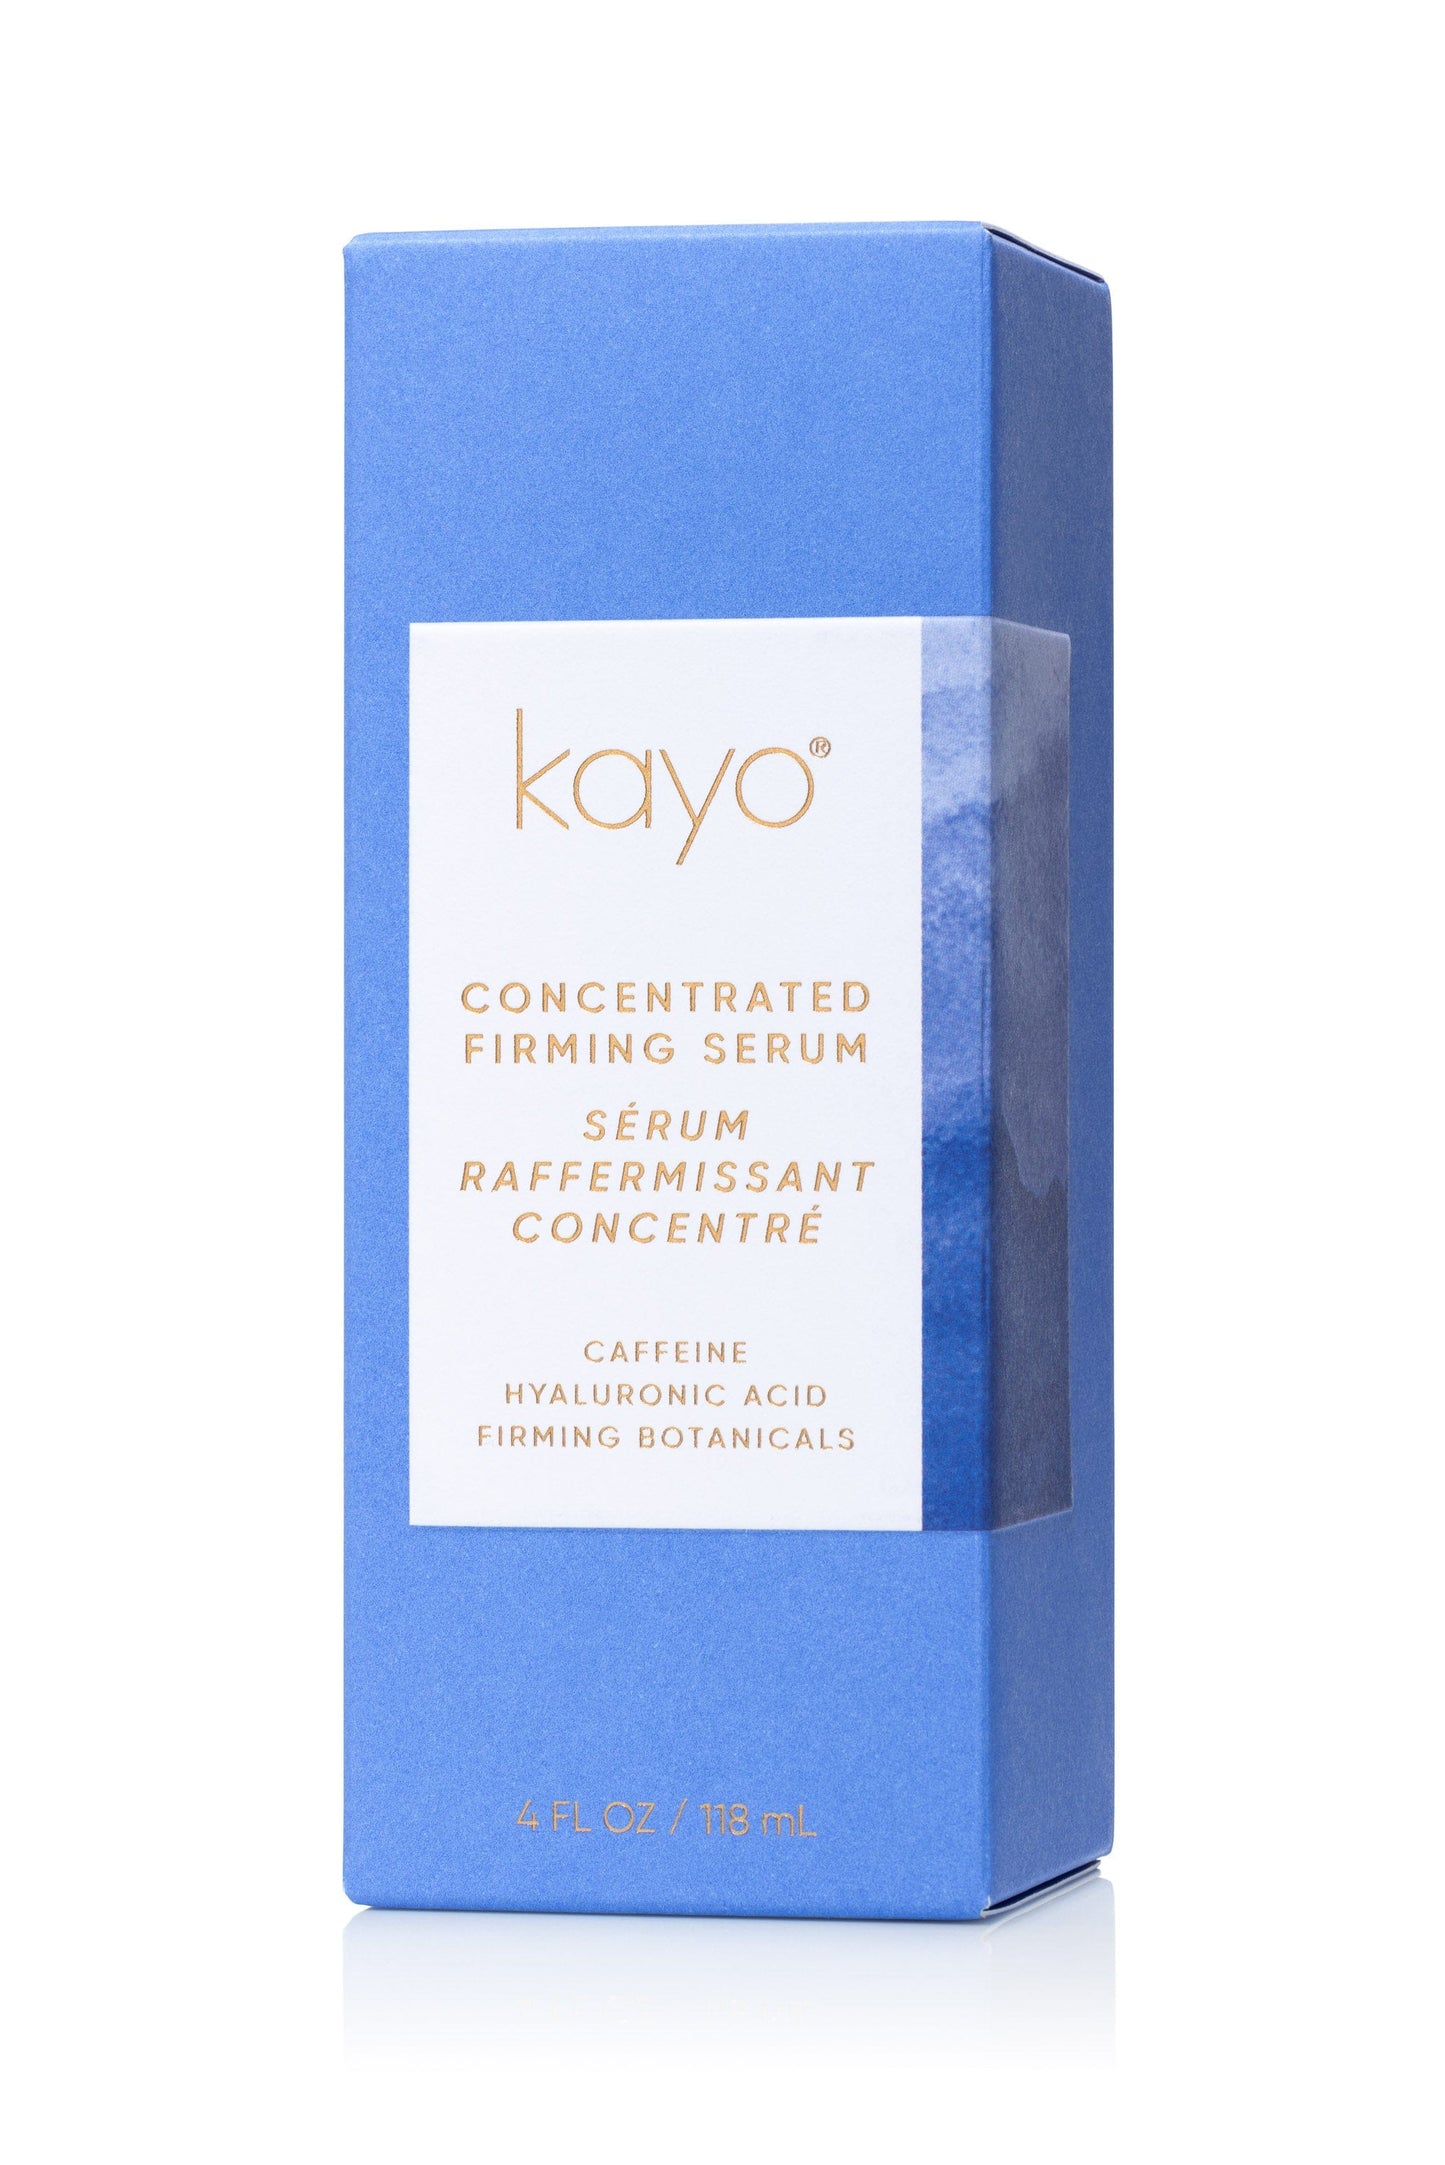 Kayo- Concentrated Firming Serum